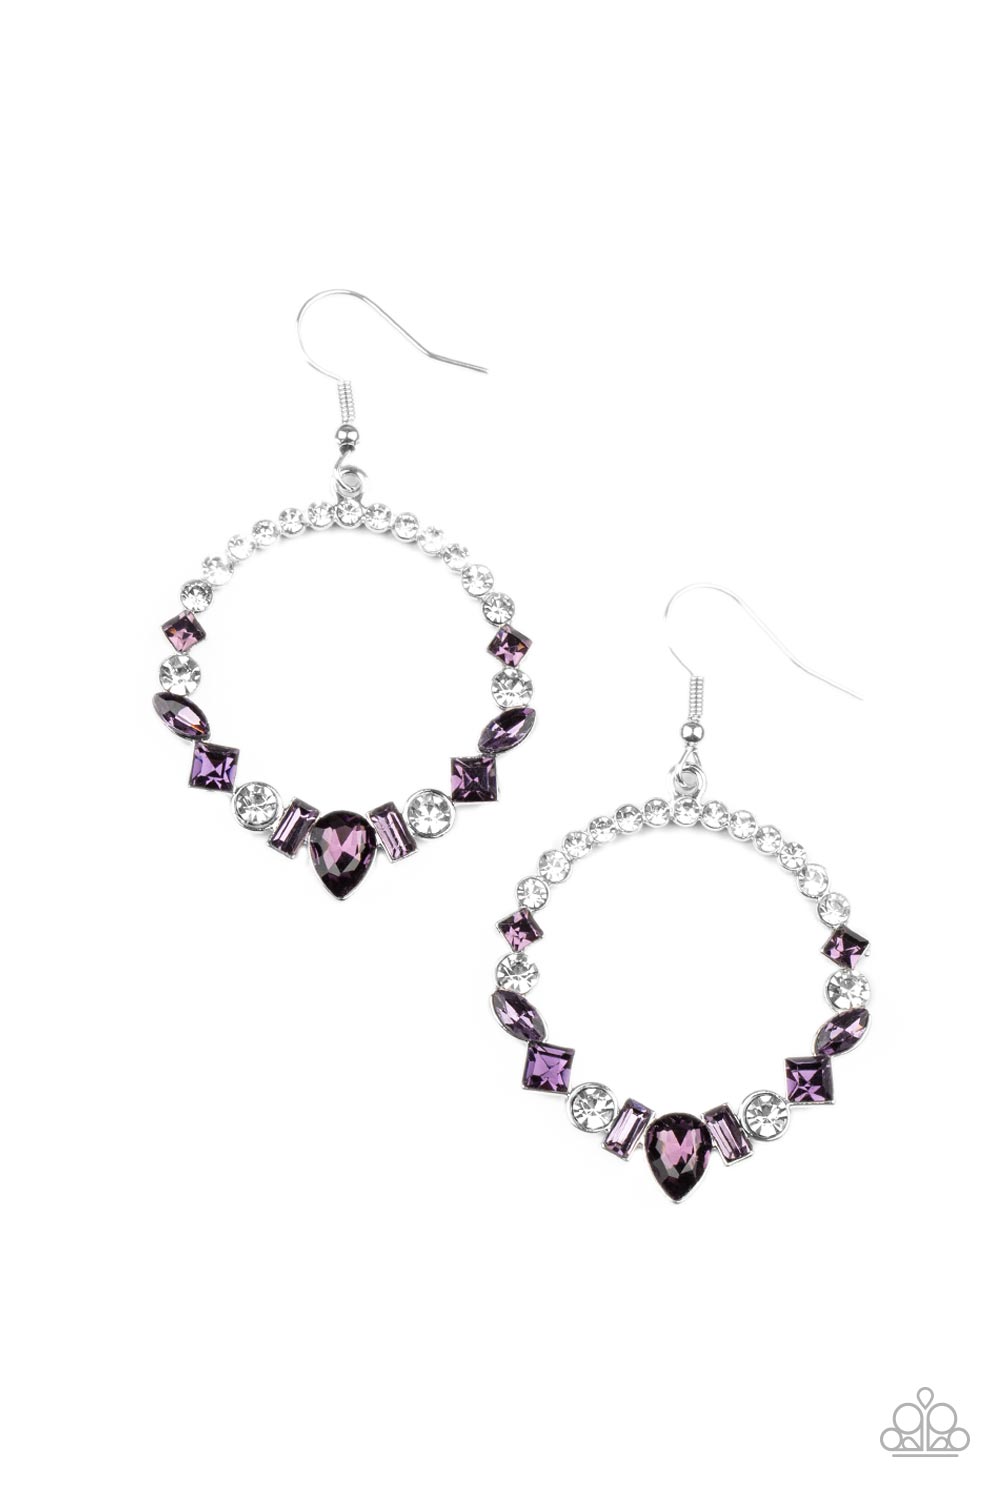 Revolutionary Refinement Purple Earrings - Paparazzi Accessories- lightbox - CarasShop.com - $5 Jewelry by Cara Jewels